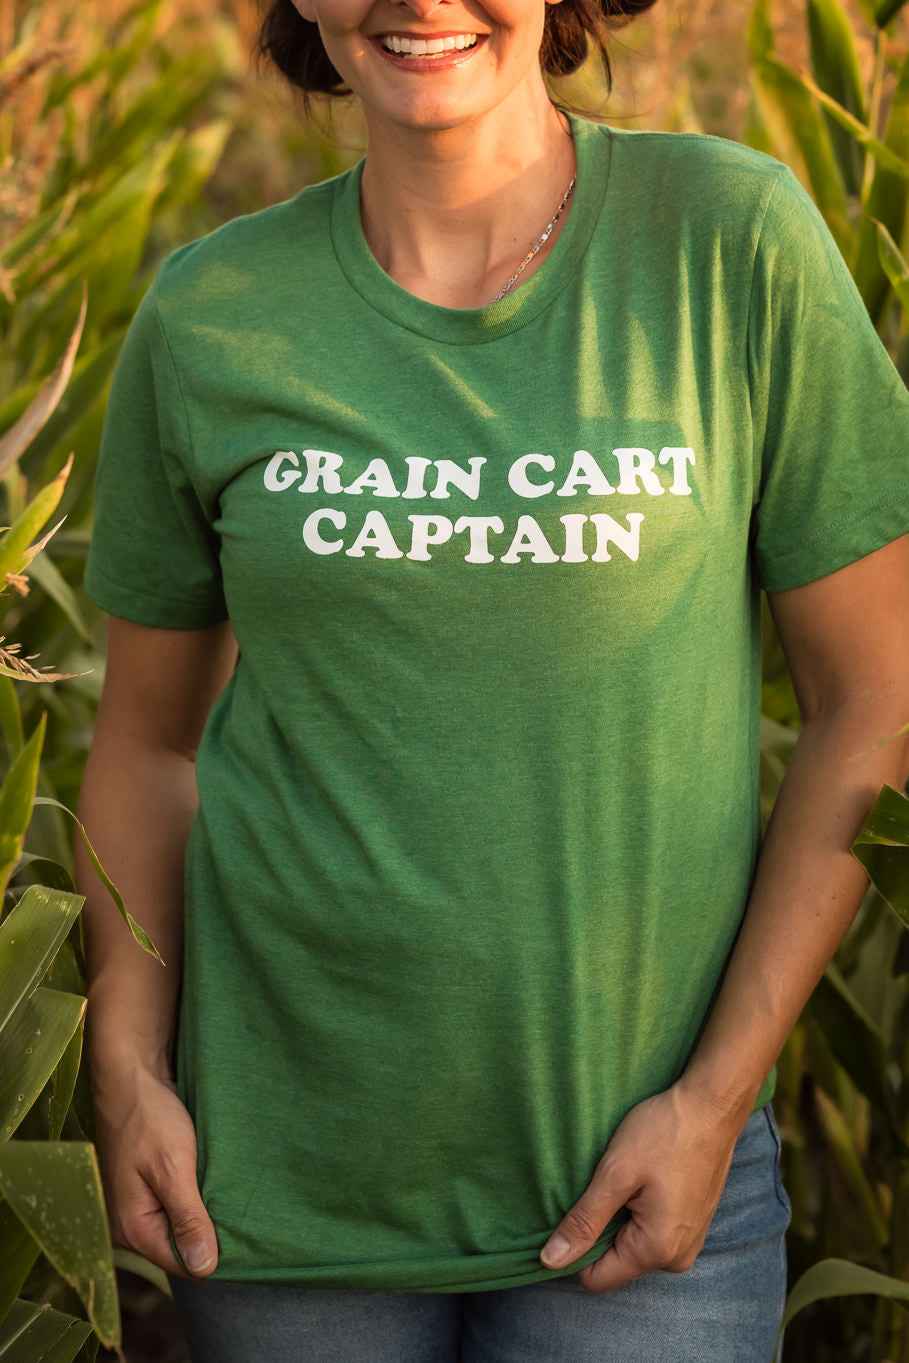 Grain Cart Captain Graphic Tee in Heather Grass Green | Sizes S - 3XL - Rosebud&#39;s Tees